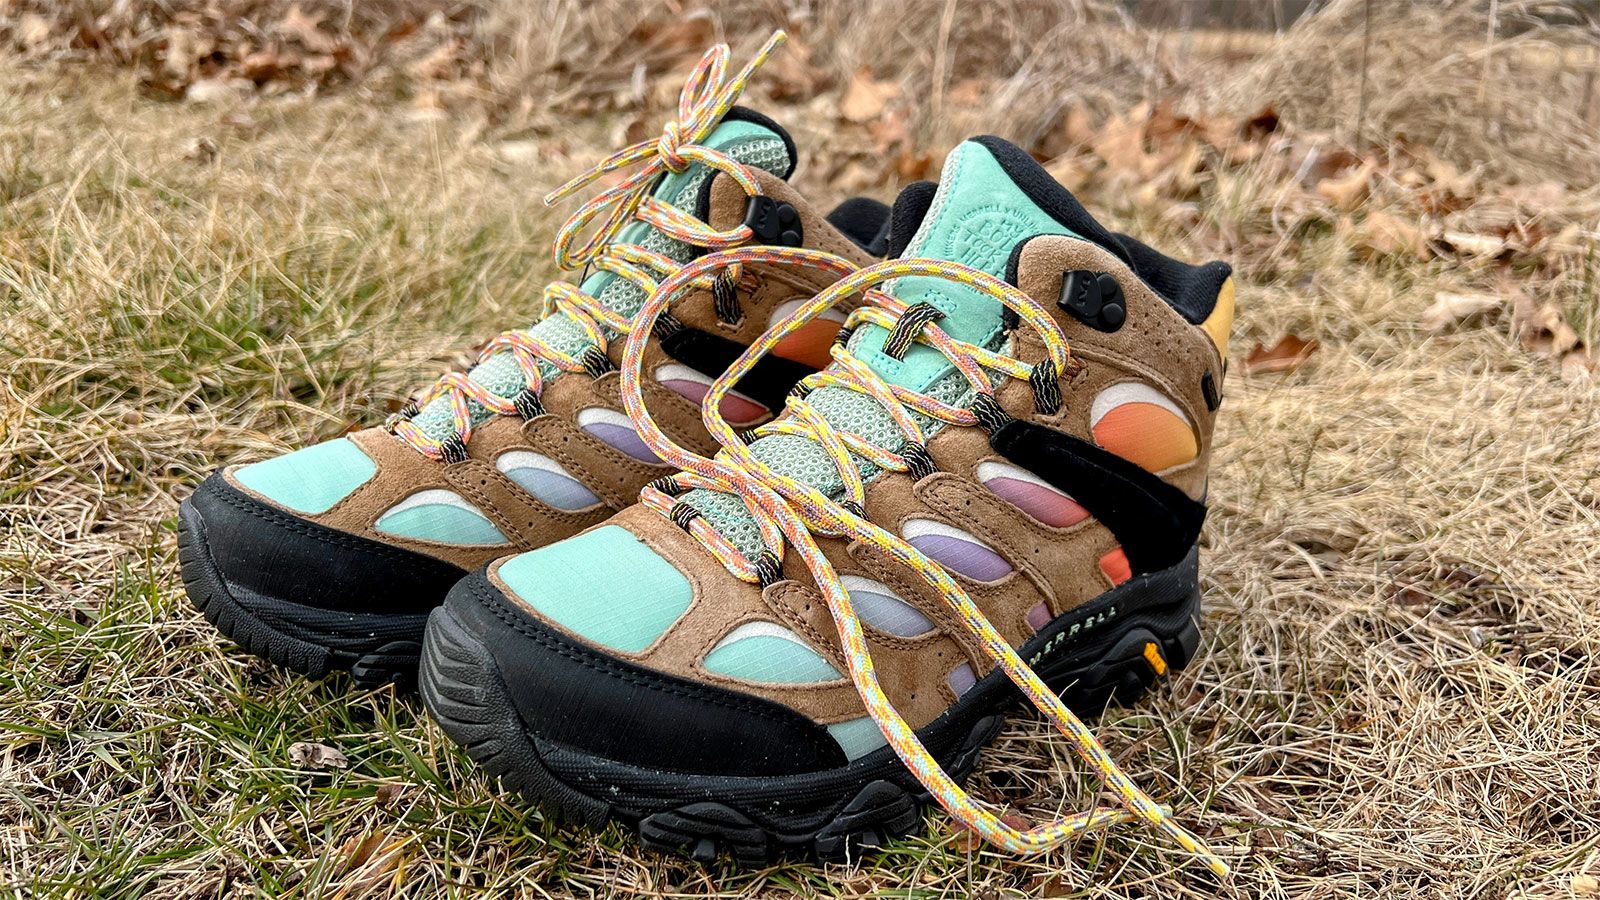 Skæbne grund maternal Merrell and Unlikely Hikers collab on the new Moab 3s | CNN Underscored